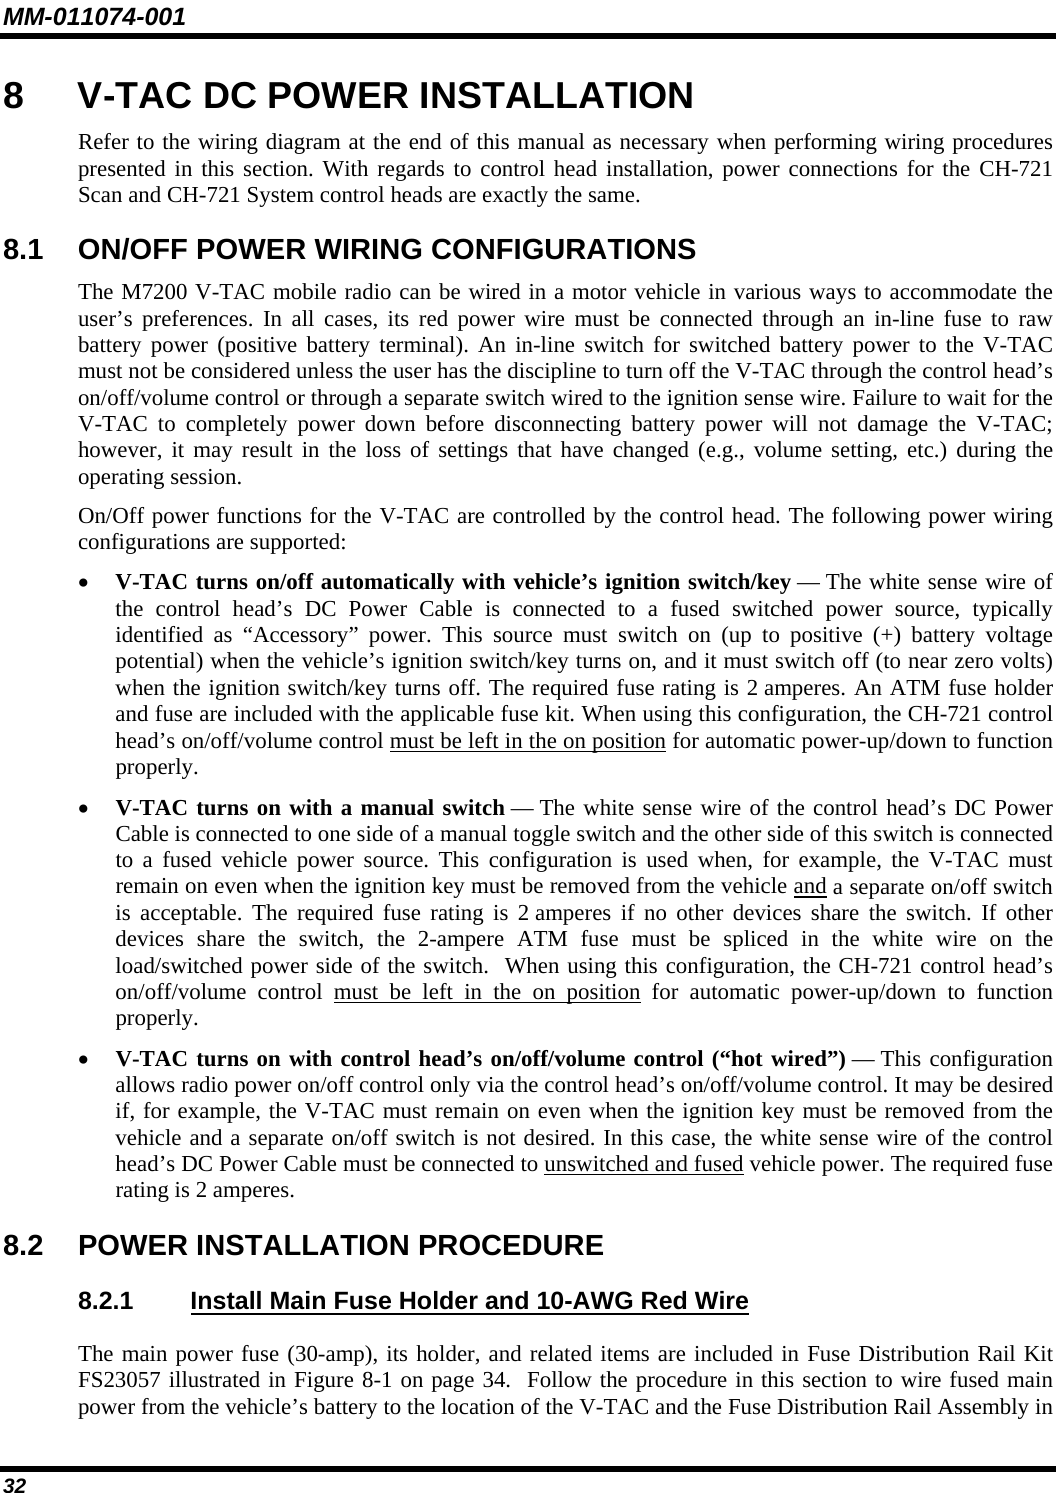 MM-011074-001 32 8  V-TAC DC POWER INSTALLATION Refer to the wiring diagram at the end of this manual as necessary when performing wiring procedures presented in this section. With regards to control head installation, power connections for the CH-721 Scan and CH-721 System control heads are exactly the same. 8.1  ON/OFF POWER WIRING CONFIGURATIONS The M7200 V-TAC mobile radio can be wired in a motor vehicle in various ways to accommodate the user’s preferences. In all cases, its red power wire must be connected through an in-line fuse to raw battery power (positive battery terminal). An in-line switch for switched battery power to the V-TAC must not be considered unless the user has the discipline to turn off the V-TAC through the control head’s on/off/volume control or through a separate switch wired to the ignition sense wire. Failure to wait for the V-TAC to completely power down before disconnecting battery power will not damage the V-TAC; however, it may result in the loss of settings that have changed (e.g., volume setting, etc.) during the operating session. On/Off power functions for the V-TAC are controlled by the control head. The following power wiring configurations are supported: • V-TAC turns on/off automatically with vehicle’s ignition switch/key — The white sense wire of the control head’s DC Power Cable is connected to a fused switched power source, typically identified as “Accessory” power. This source must switch on (up to positive (+) battery voltage potential) when the vehicle’s ignition switch/key turns on, and it must switch off (to near zero volts) when the ignition switch/key turns off. The required fuse rating is 2 amperes. An ATM fuse holder and fuse are included with the applicable fuse kit. When using this configuration, the CH-721 control head’s on/off/volume control must be left in the on position for automatic power-up/down to function properly. • V-TAC turns on with a manual switch — The white sense wire of the control head’s DC Power Cable is connected to one side of a manual toggle switch and the other side of this switch is connected to a fused vehicle power source. This configuration is used when, for example, the V-TAC must remain on even when the ignition key must be removed from the vehicle and a separate on/off switch is acceptable. The required fuse rating is 2 amperes if no other devices share the switch. If other devices share the switch, the 2-ampere ATM fuse must be spliced in the white wire on the load/switched power side of the switch.  When using this configuration, the CH-721 control head’s on/off/volume control must be left in the on position for automatic power-up/down to function properly. • V-TAC turns on with control head’s on/off/volume control (“hot wired”) — This configuration allows radio power on/off control only via the control head’s on/off/volume control. It may be desired if, for example, the V-TAC must remain on even when the ignition key must be removed from the vehicle and a separate on/off switch is not desired. In this case, the white sense wire of the control head’s DC Power Cable must be connected to unswitched and fused vehicle power. The required fuse rating is 2 amperes. 8.2  POWER INSTALLATION PROCEDURE 8.2.1  Install Main Fuse Holder and 10-AWG Red Wire The main power fuse (30-amp), its holder, and related items are included in Fuse Distribution Rail Kit FS23057 illustrated in Figure 8-1 on page 34.  Follow the procedure in this section to wire fused main power from the vehicle’s battery to the location of the V-TAC and the Fuse Distribution Rail Assembly in 